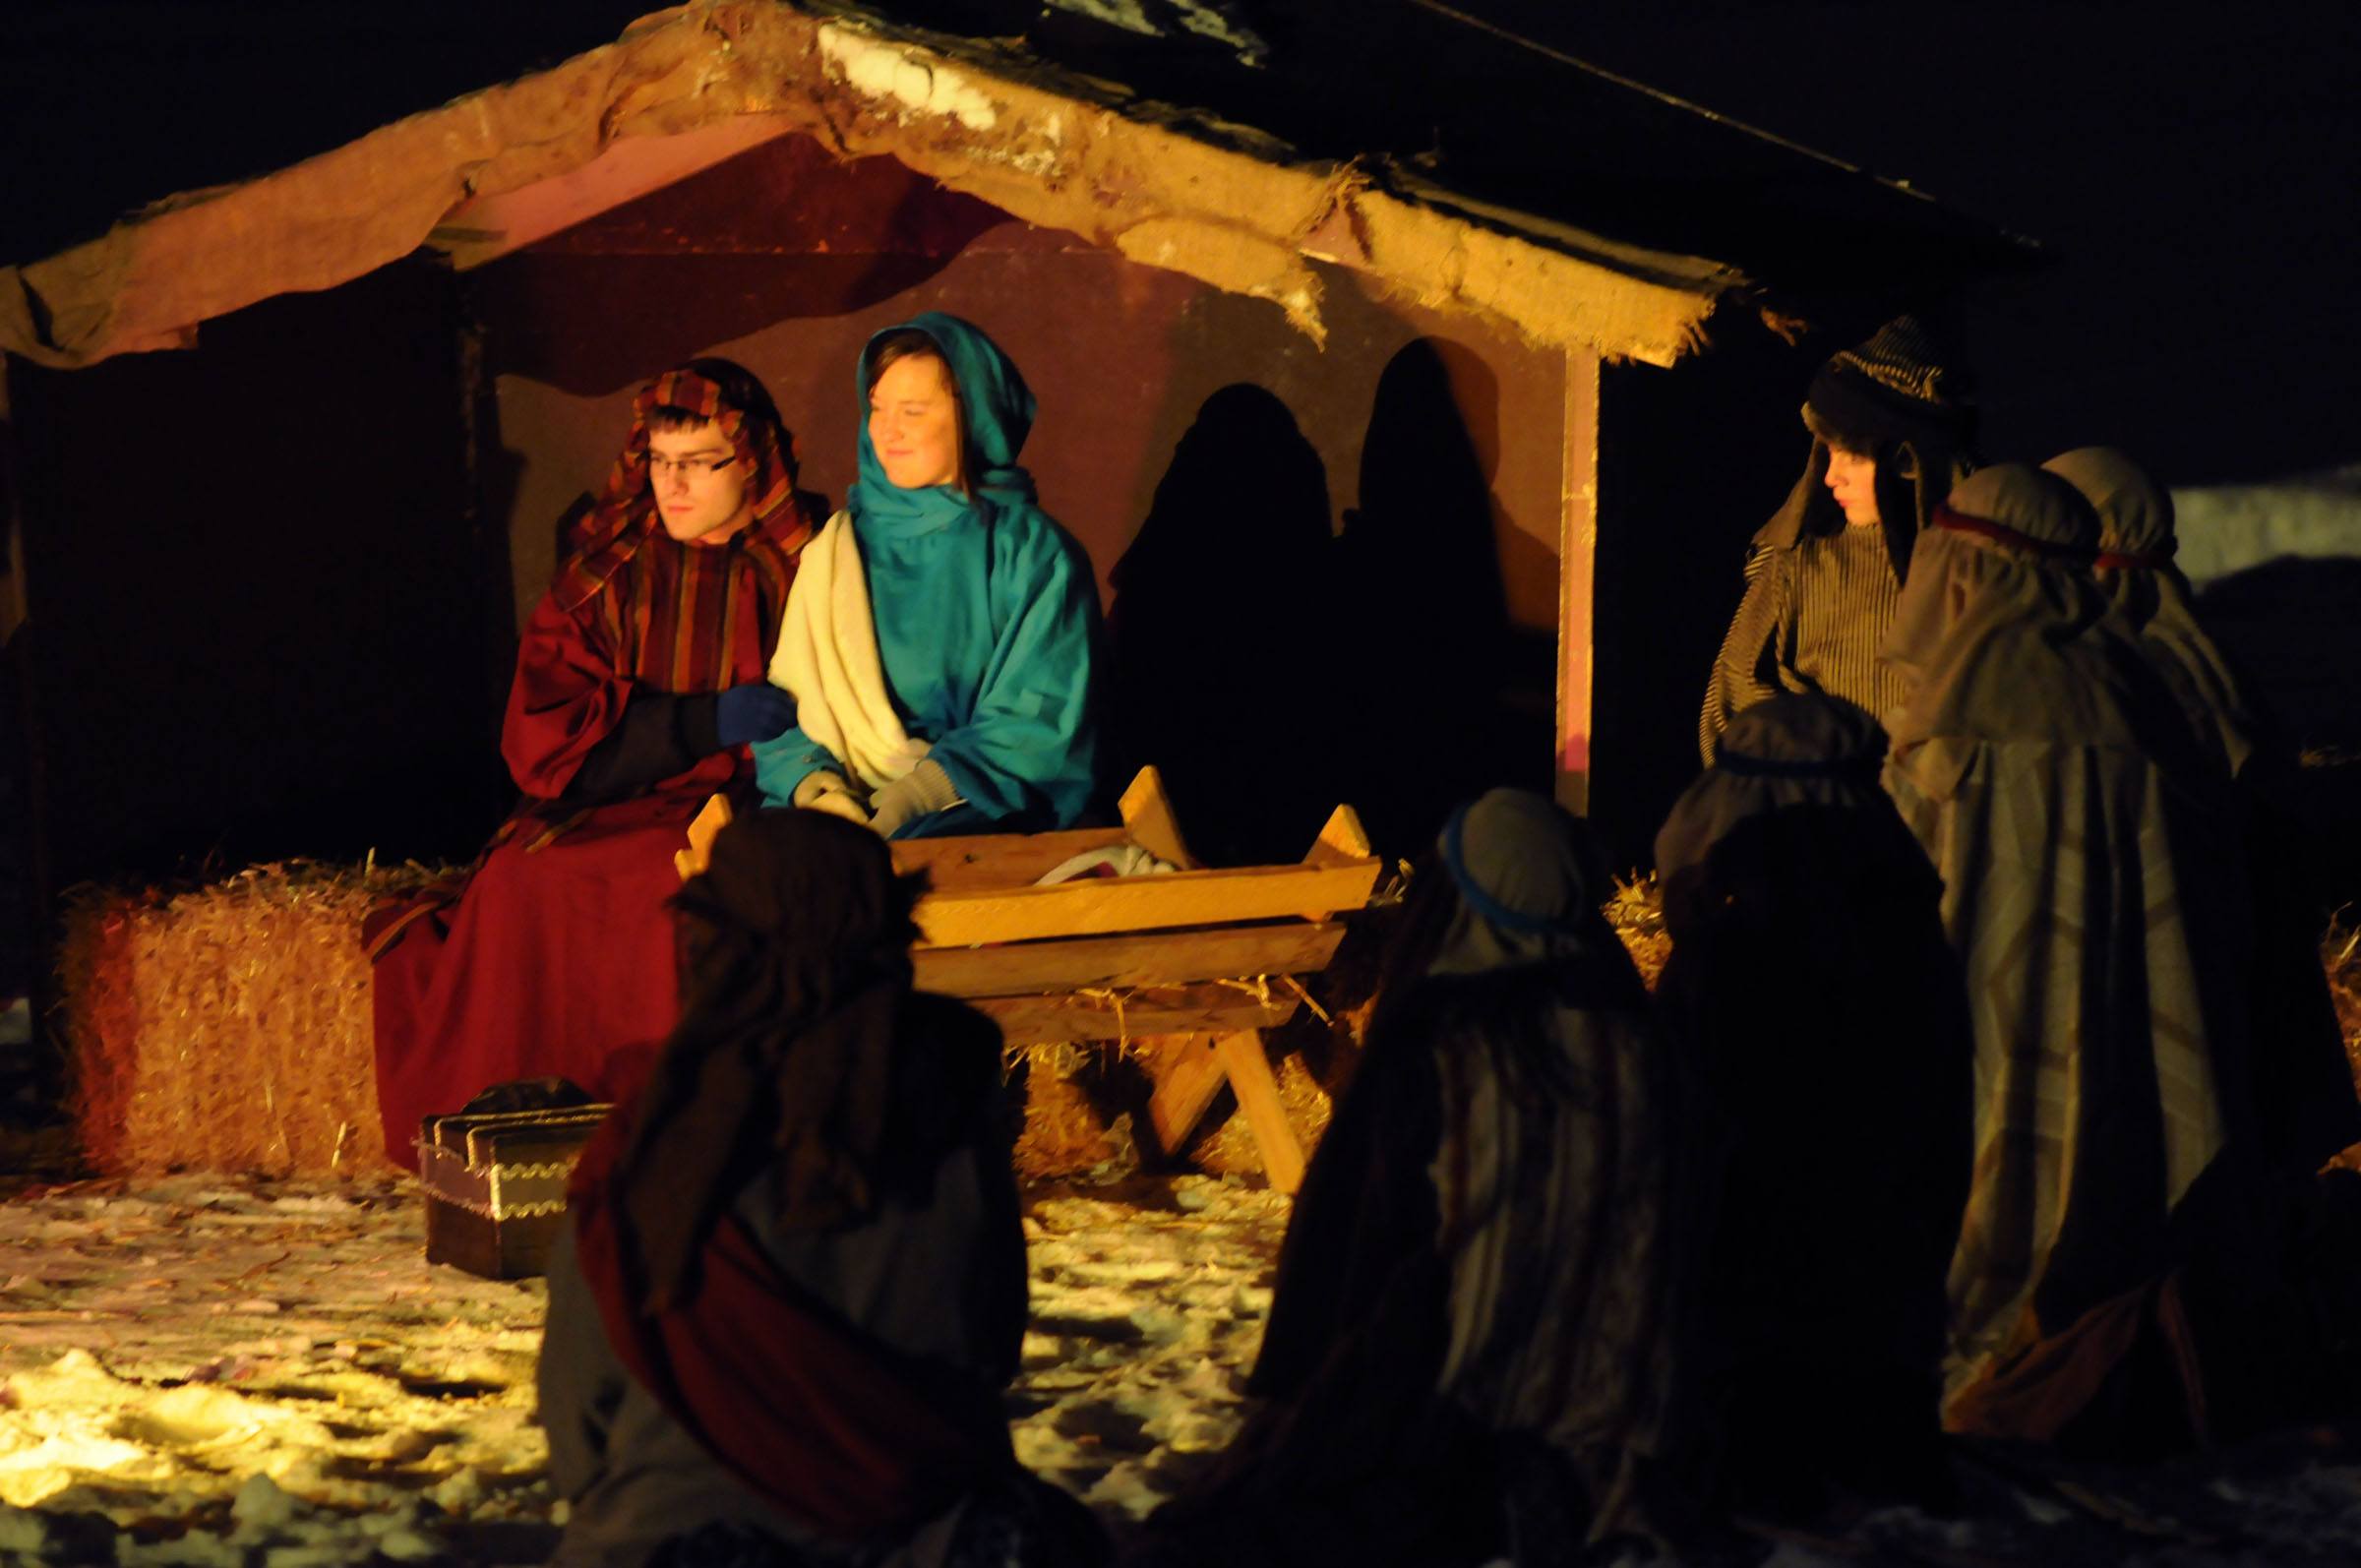 CHRISTMAS GIFT- The 30th Annual nativity pageant presented by the Church of Latter-Day Saints in Red Deer drew a huge crowd Tuesday evening along with over 200 nativity displays showcased inside the church.